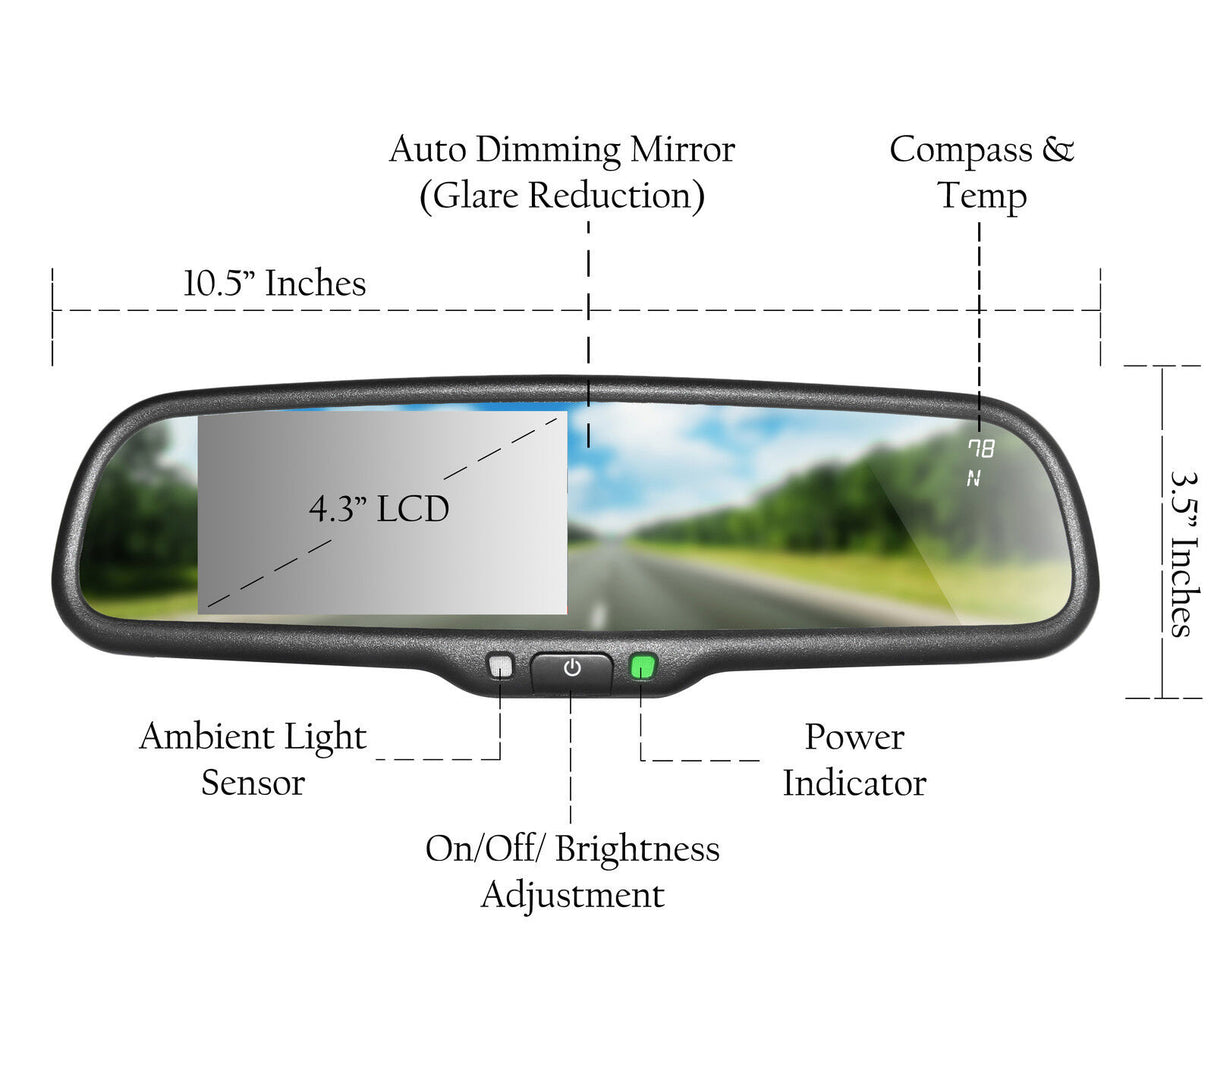 Master Tailgaters 10.5 OEM Rear View Mirror with 4.3 LCD Screen |  Rearview Universal Fit Mount | Auto Adjusting Brightness LCD | Anti Glare |  Full